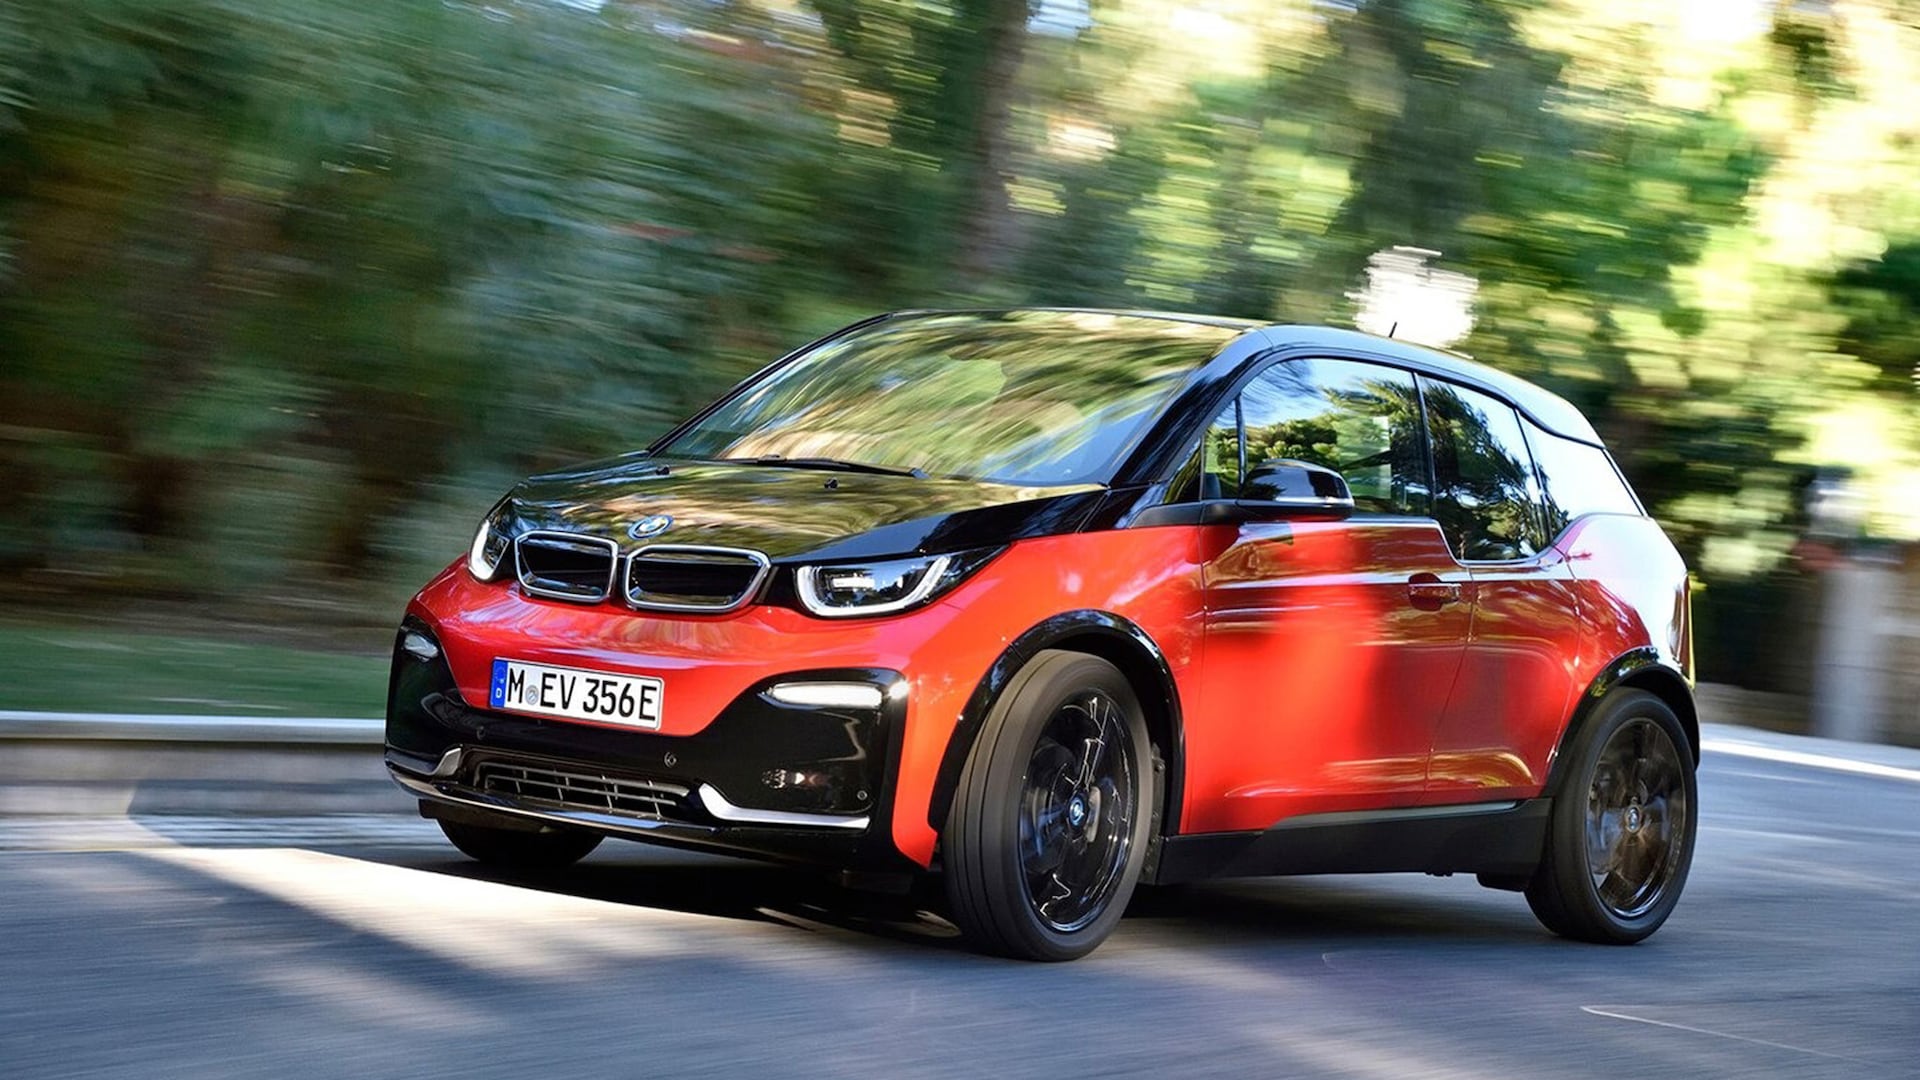 2021 BMW I3 Prices, Reviews, and Photos - MotorTrend